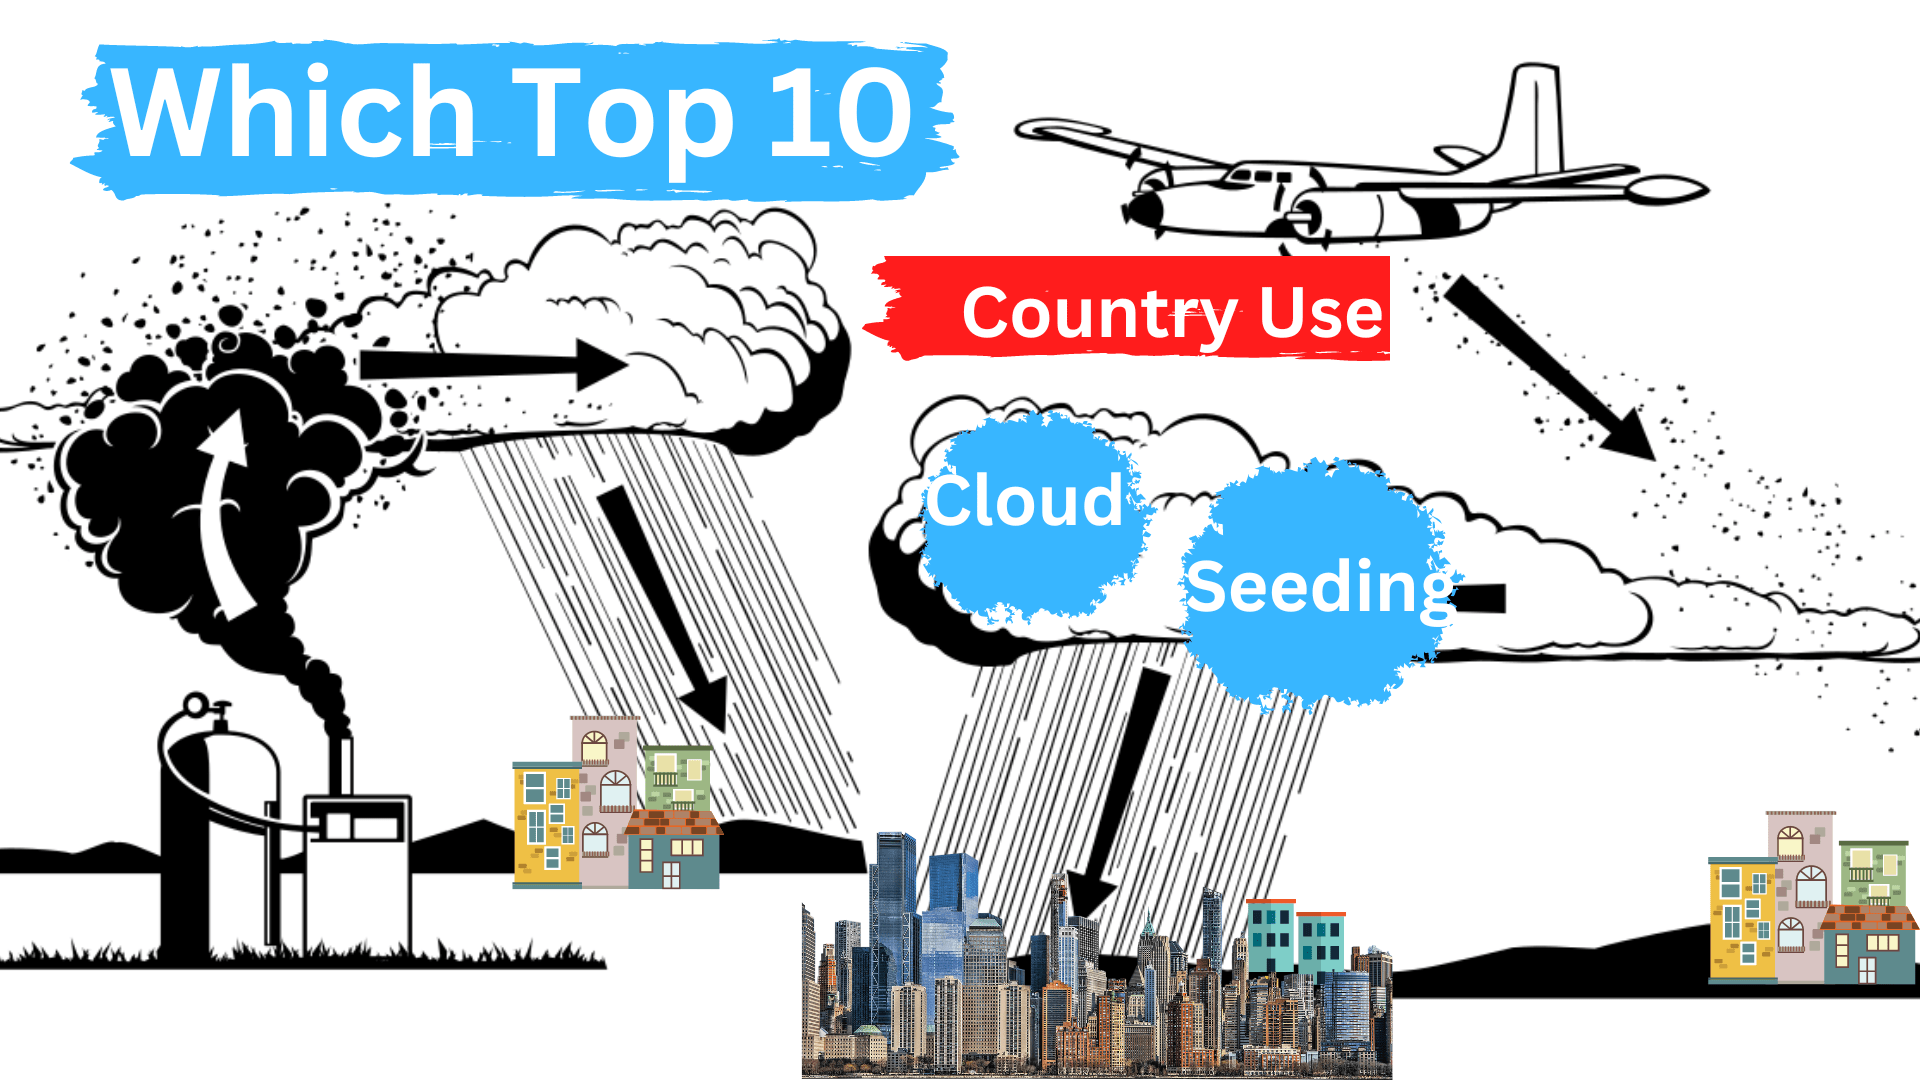 Which Top 10 Country Use Cloud Seeding